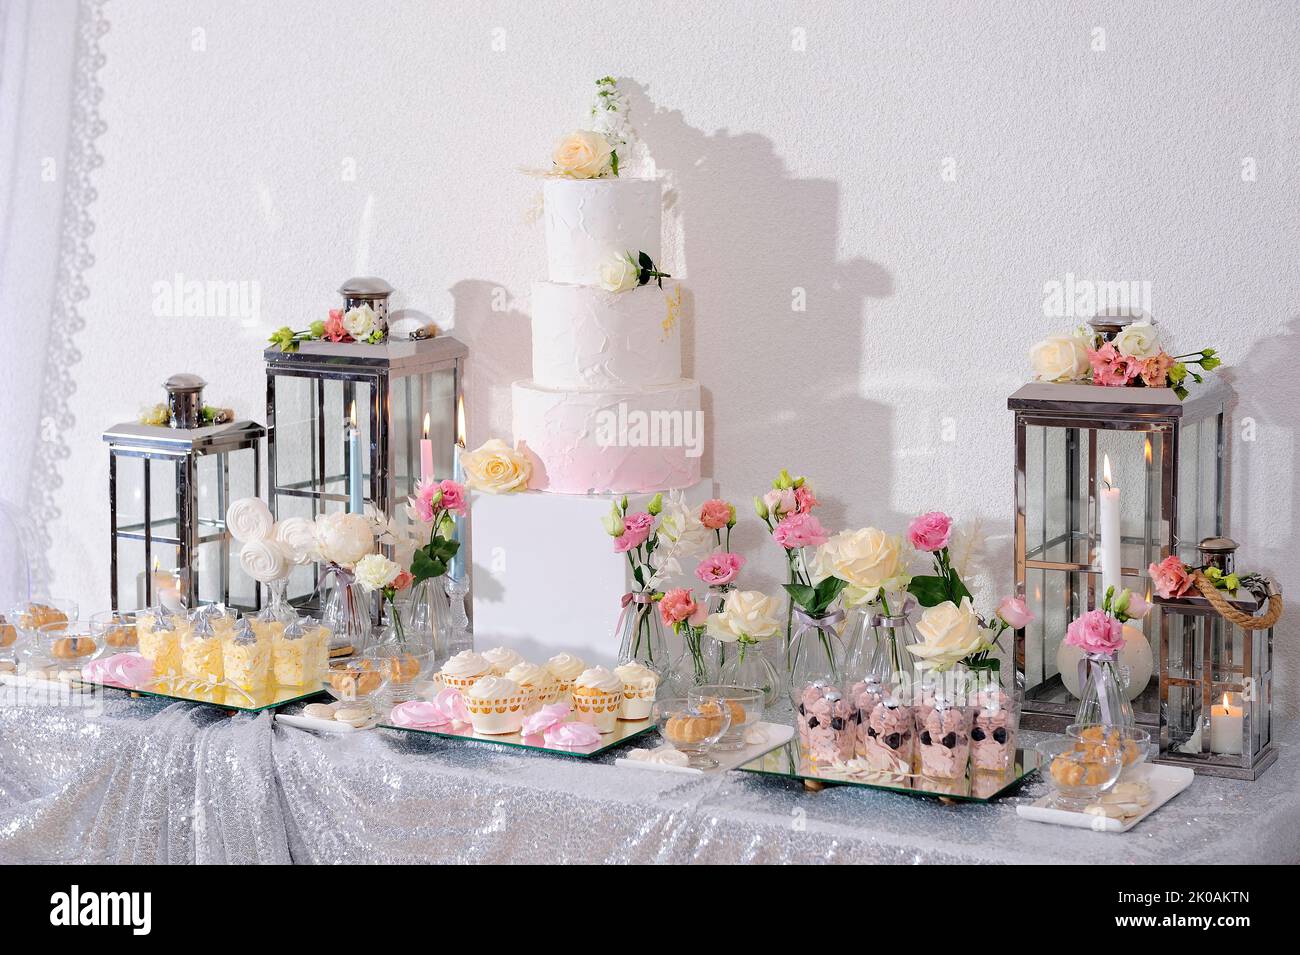 cake, cakes, ceremonial, candy bar, ceremonies, ceremony, cuisine, cuisines, culinary, dessert, dessert topping, dessert toppings, desserts, Stock Photo